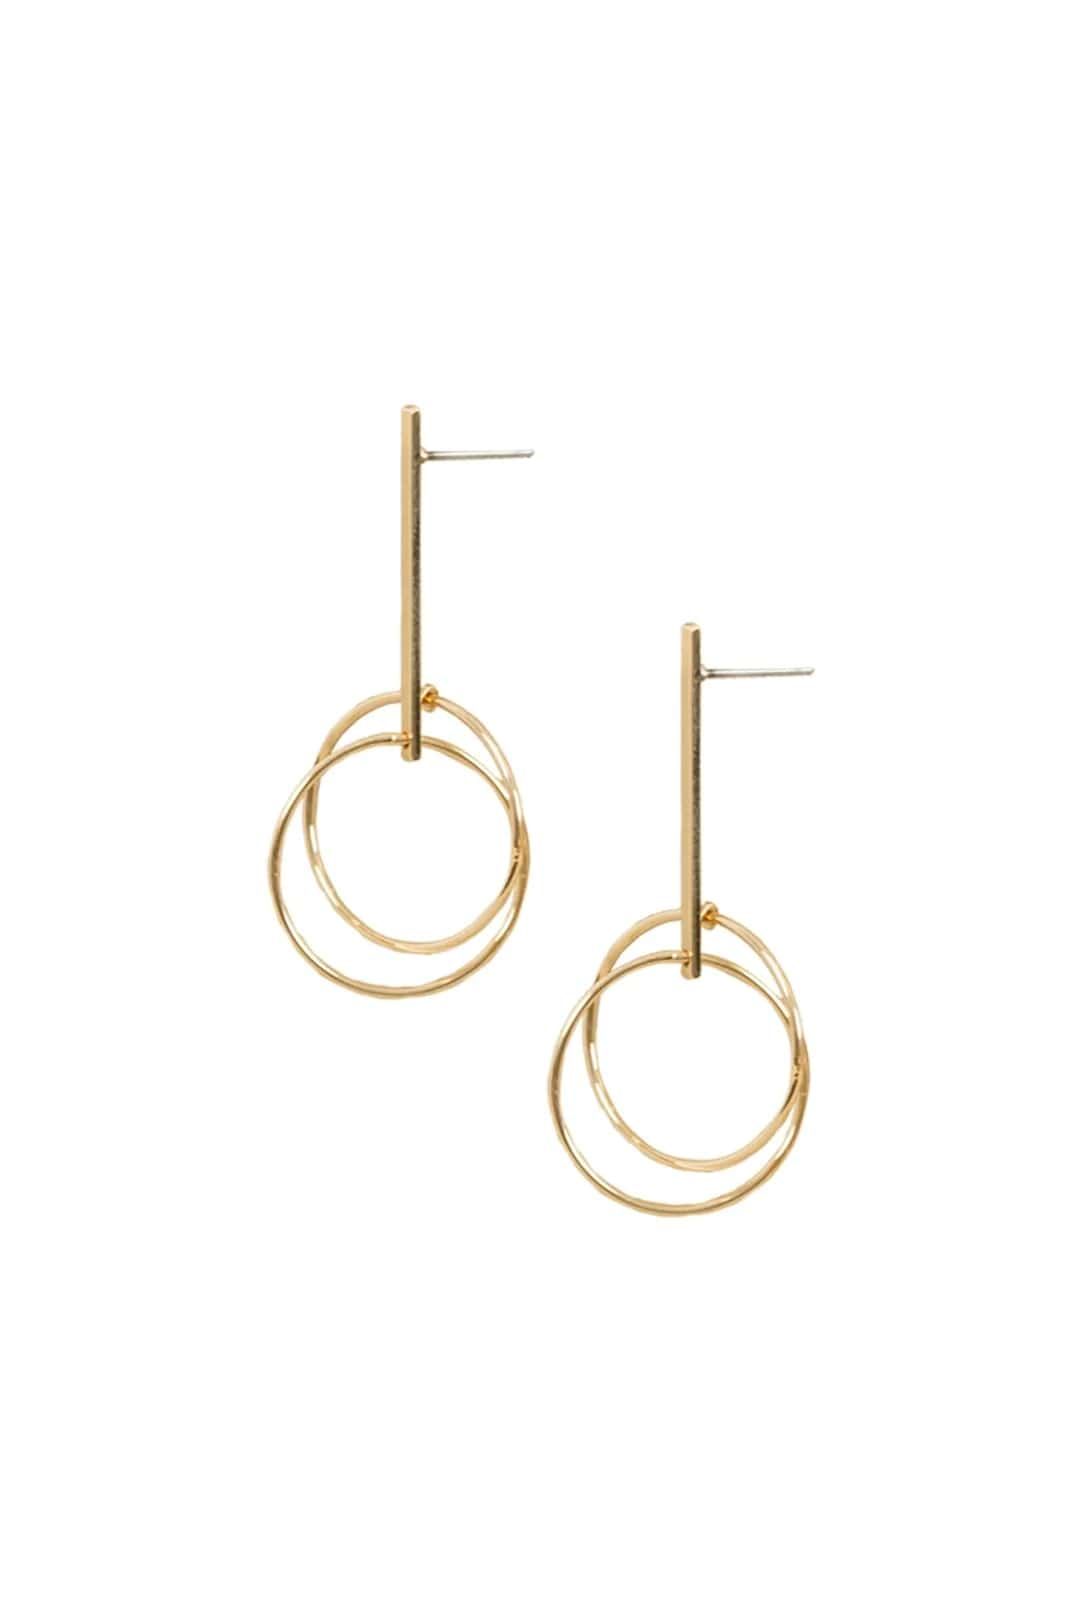 Axis Rod Drop Stud Earrings by Adorne, available for purchase